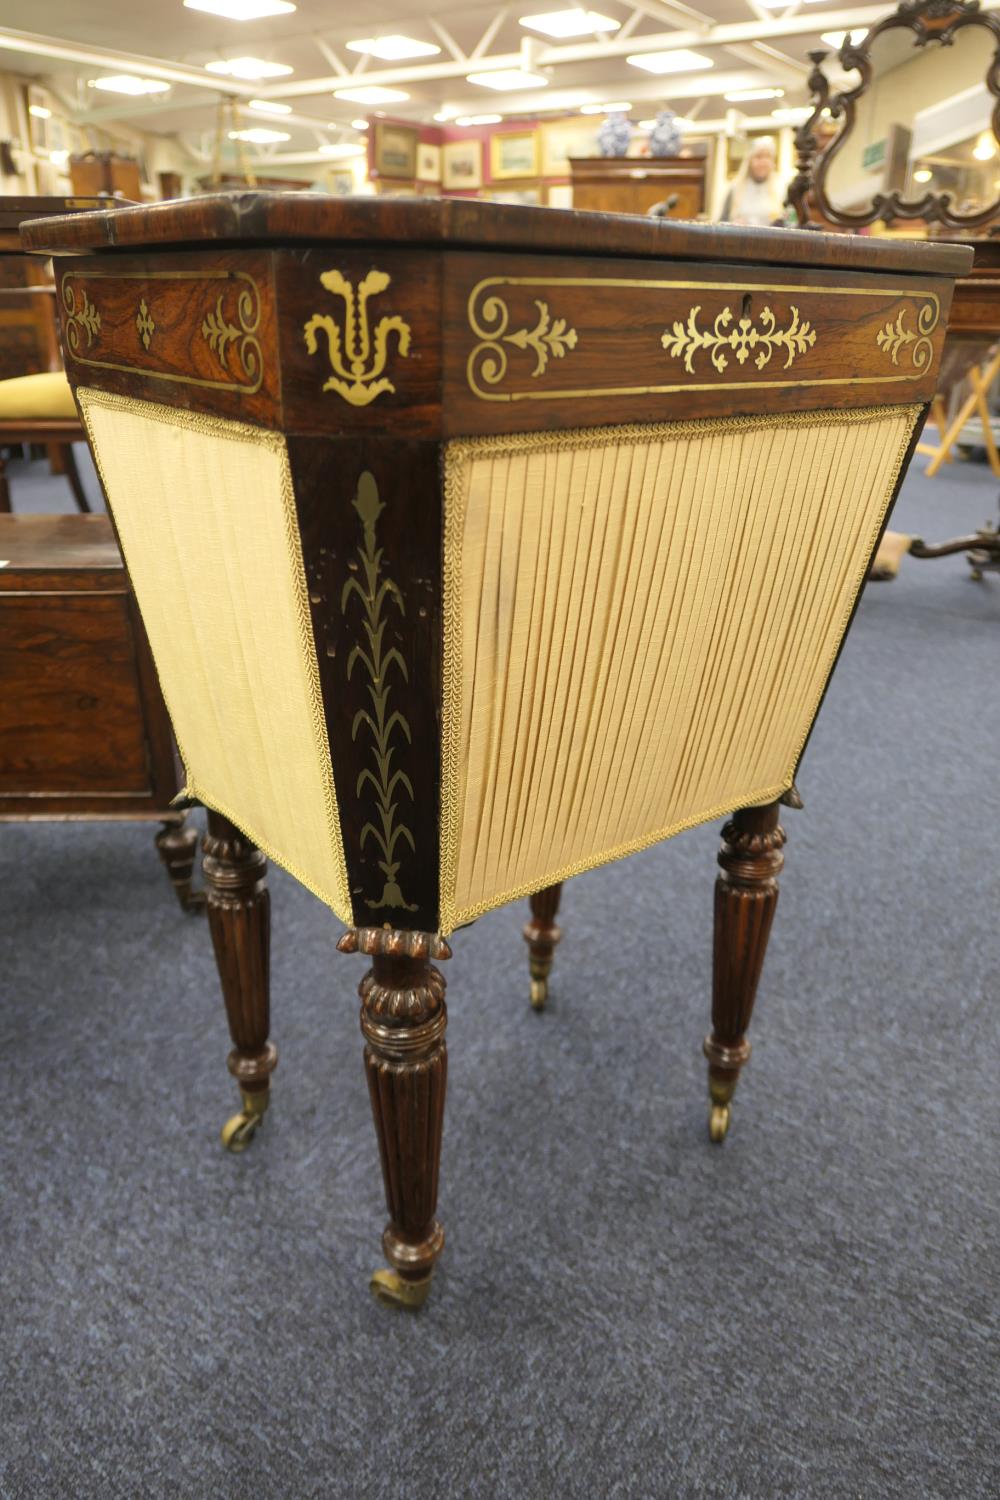 George IV rosewood and brass inlaid decanter stand or sewing box, circa 1825, the top with canted - Image 7 of 9